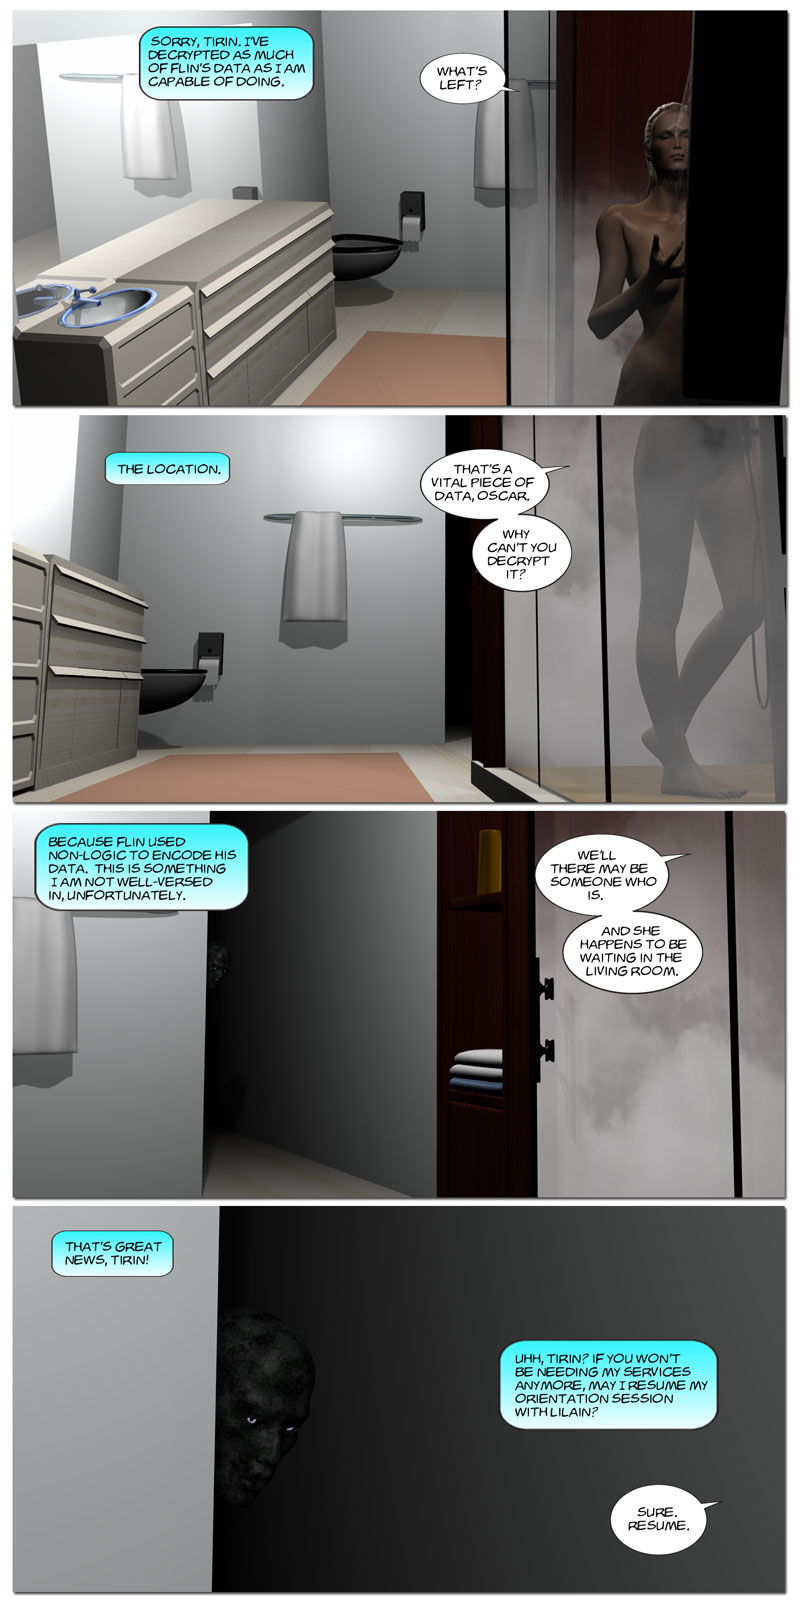 Chapter 6, page 8 – Tirin showers while a Shadow watches